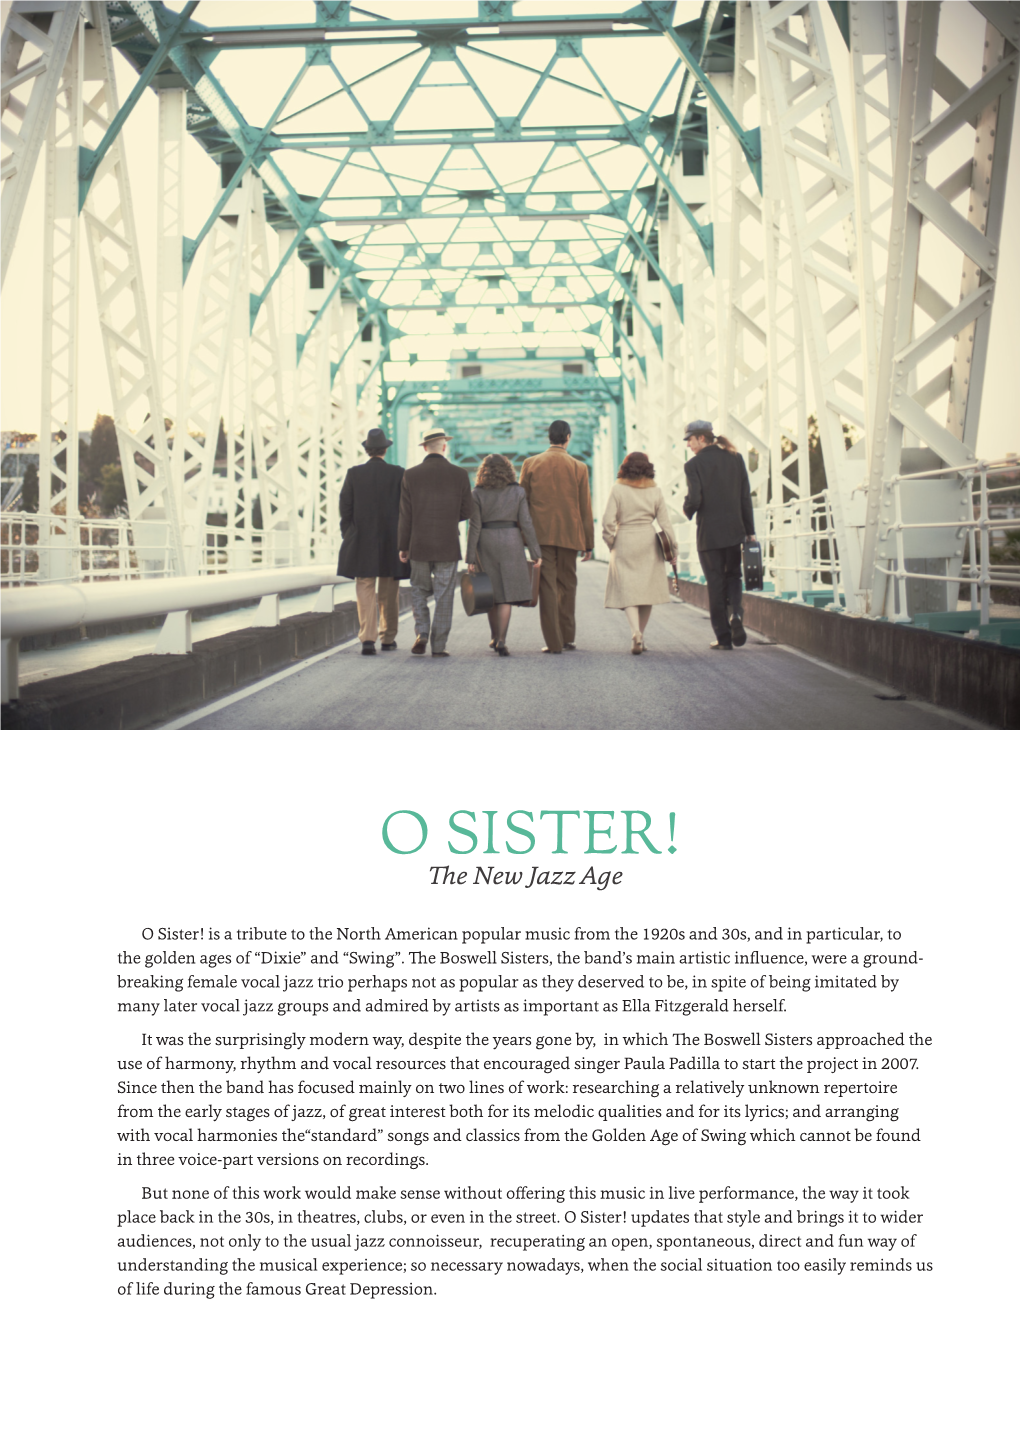 O Sister! Is a Tribute to the North American Popular Music from the 1920S and 30S, and in Particular, to the Golden Ages of “Dixie” and “Swing”